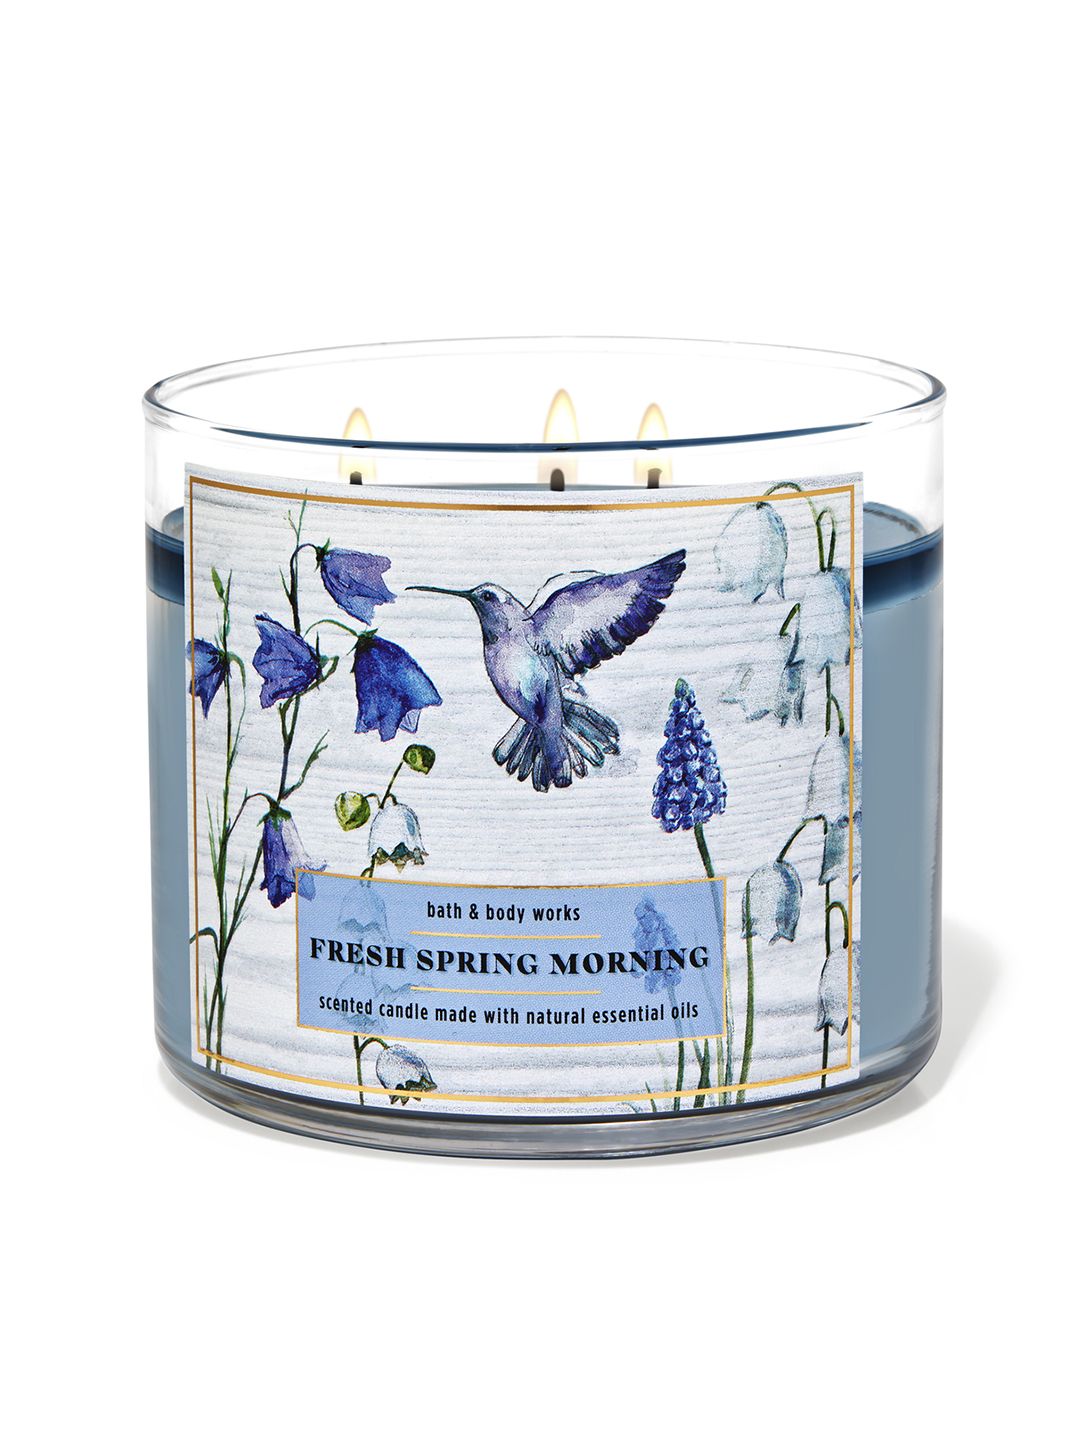 Bath & Body Works Fresh Spring Morning 3-Wick Candle - 411 g Price in India